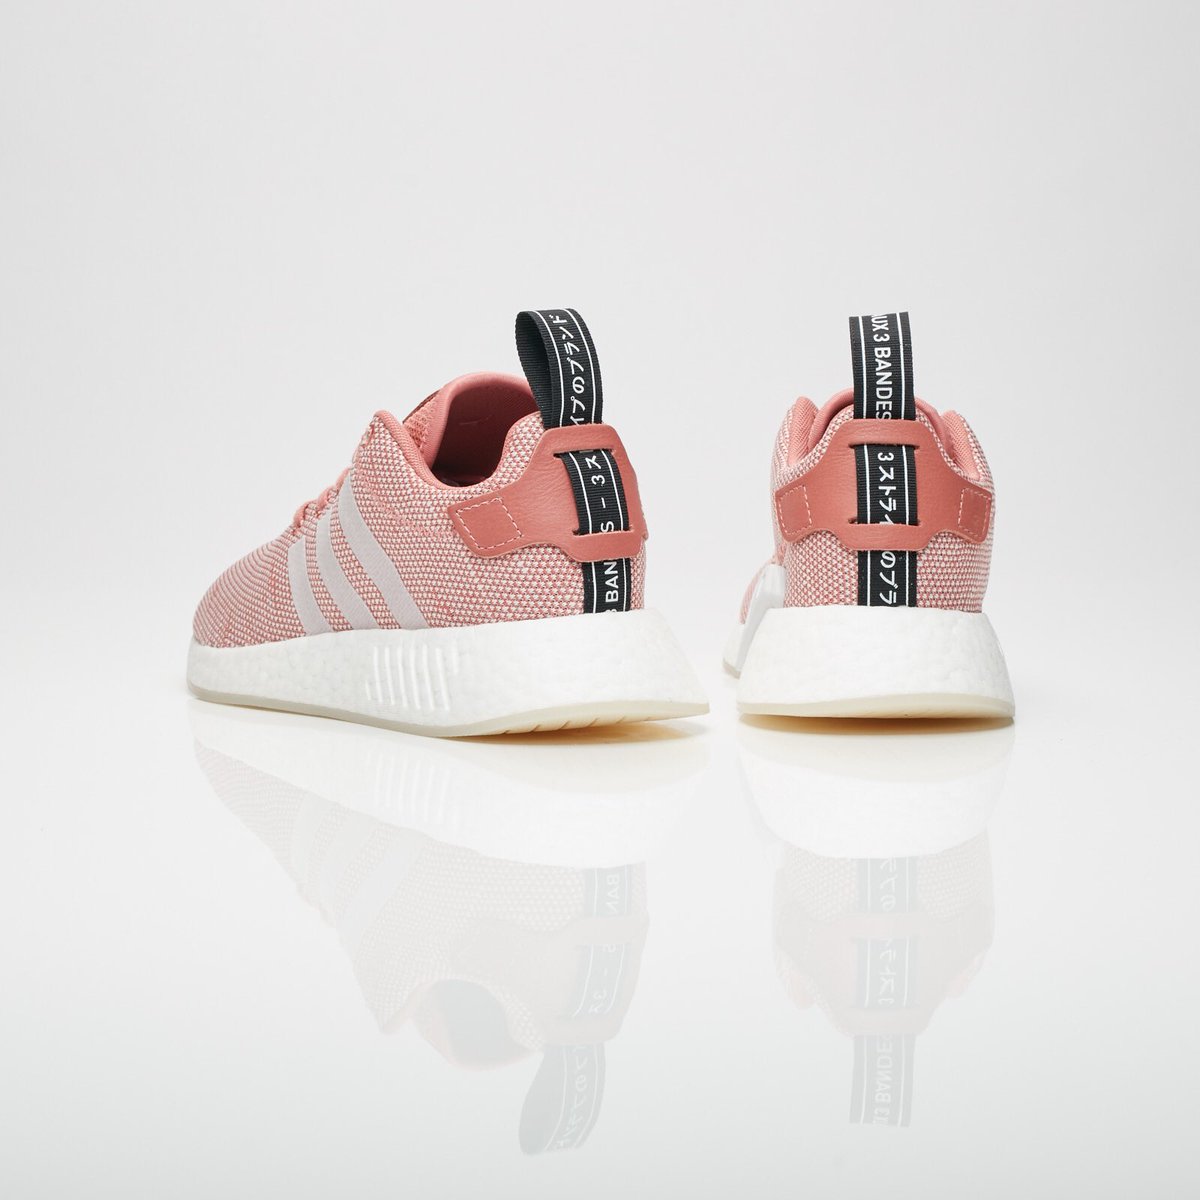 8. Adidas NMD R2 for WomenSize: UK5.5 and 6N/p: RM580, now: RM199